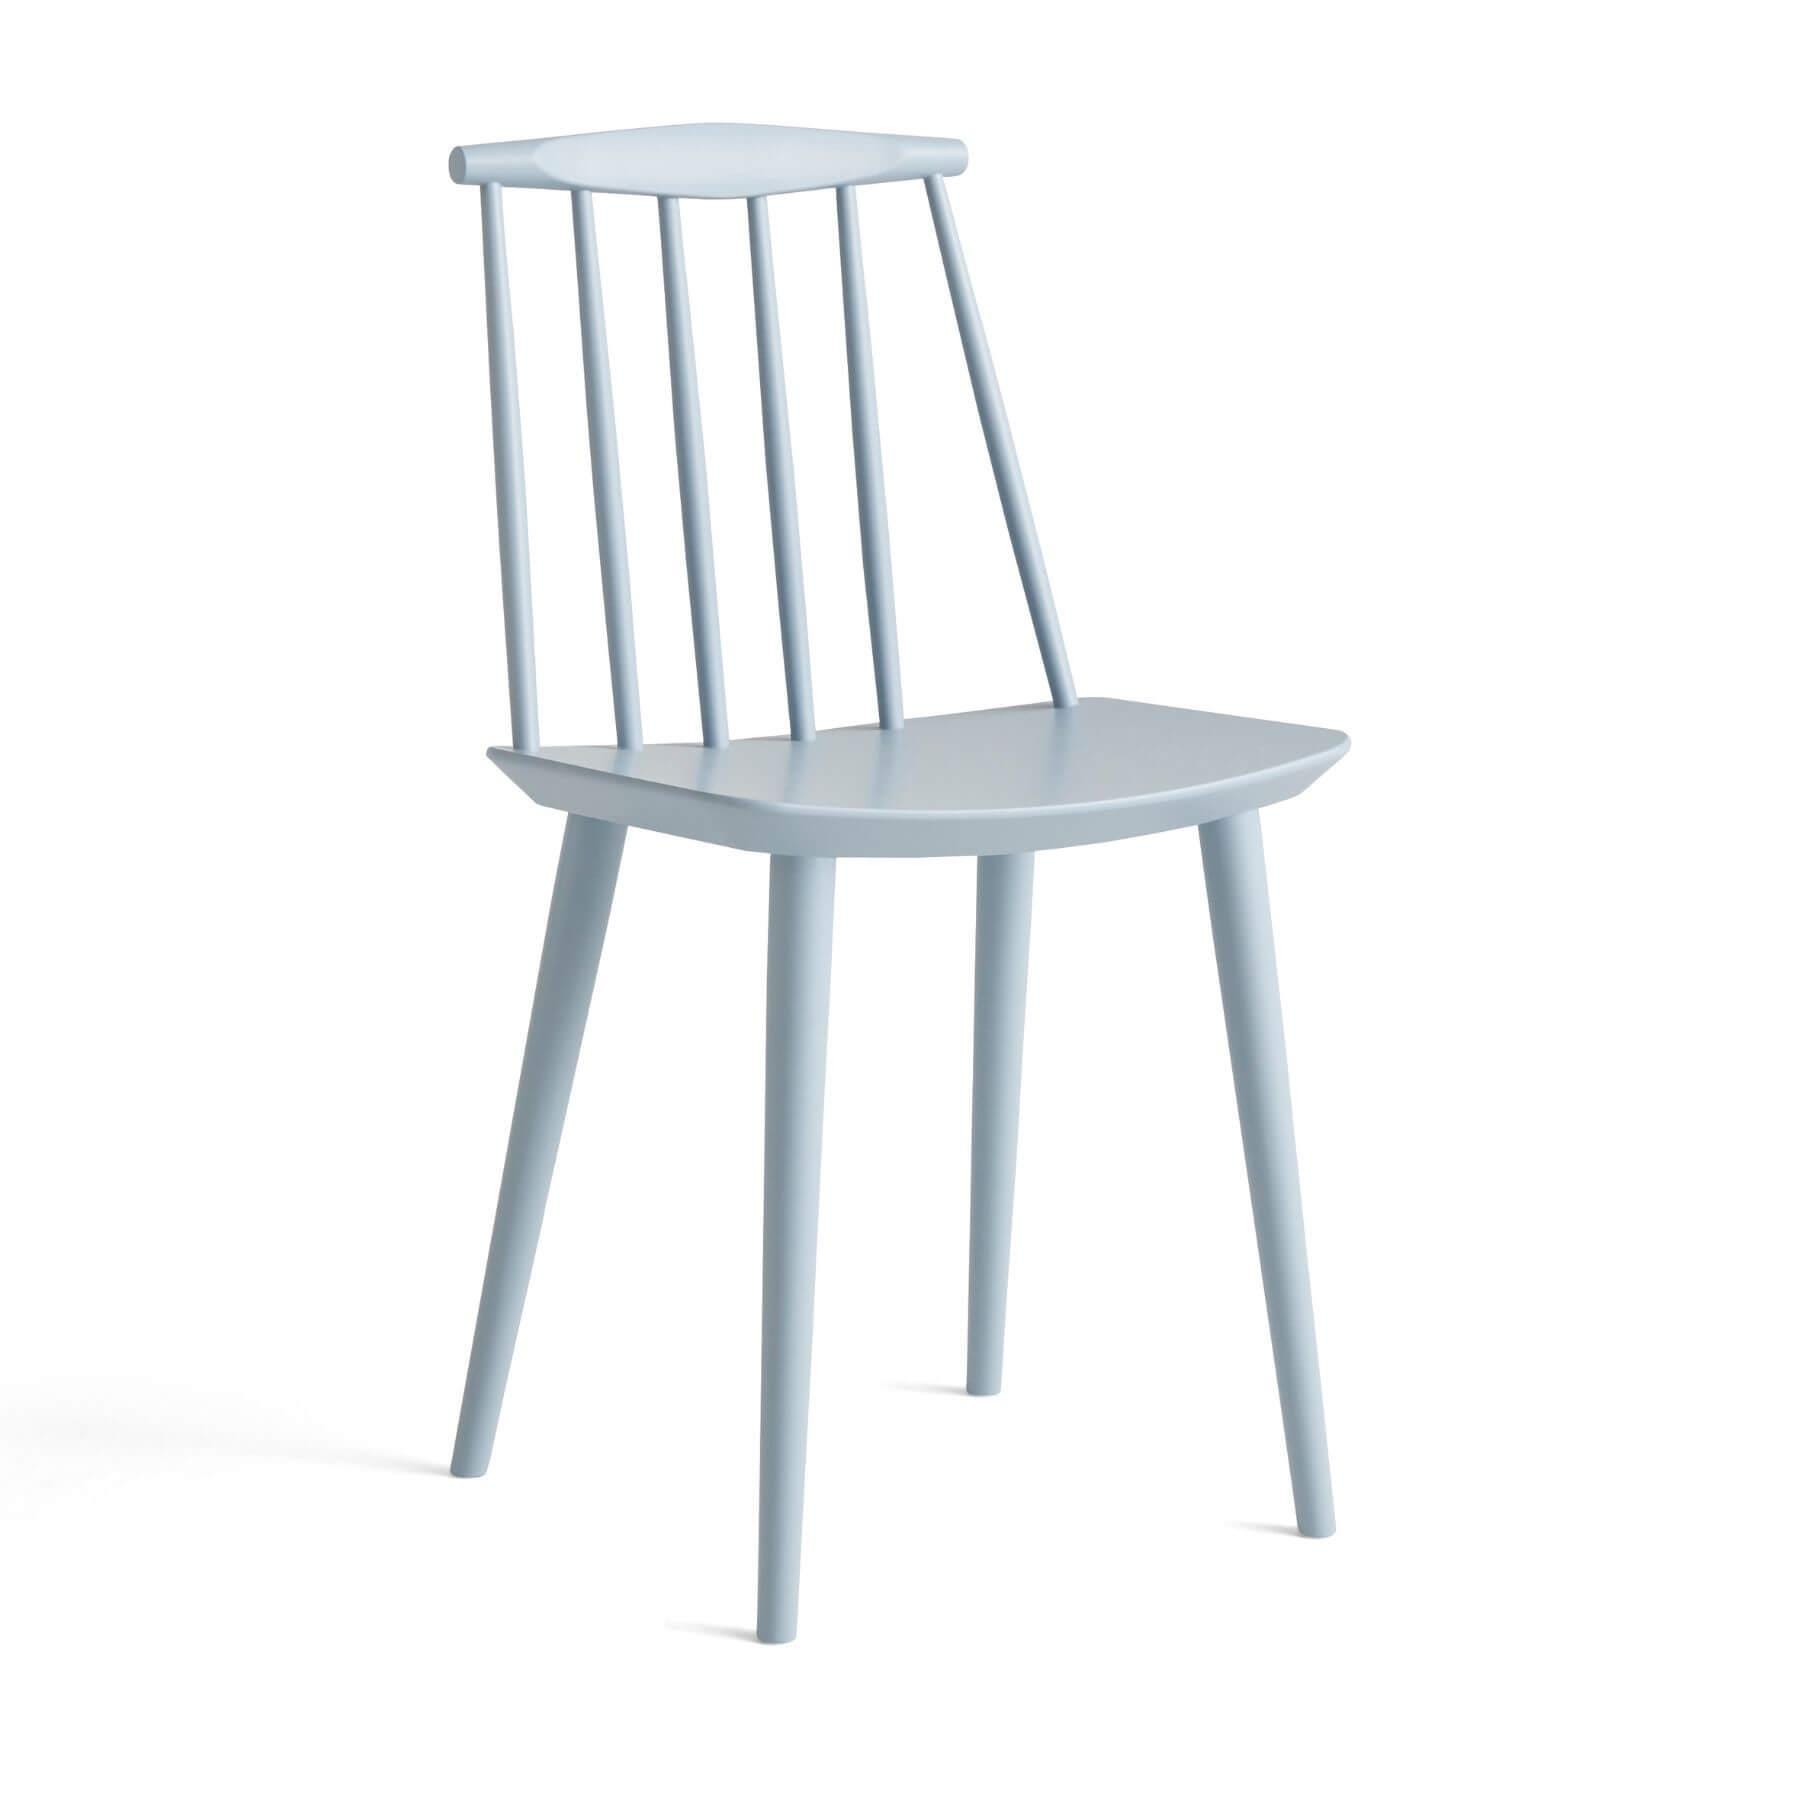 Hay Jseries 77 Dining Chair Beech Lacquered Slate Blue Designer Furniture From Holloways Of Ludlow